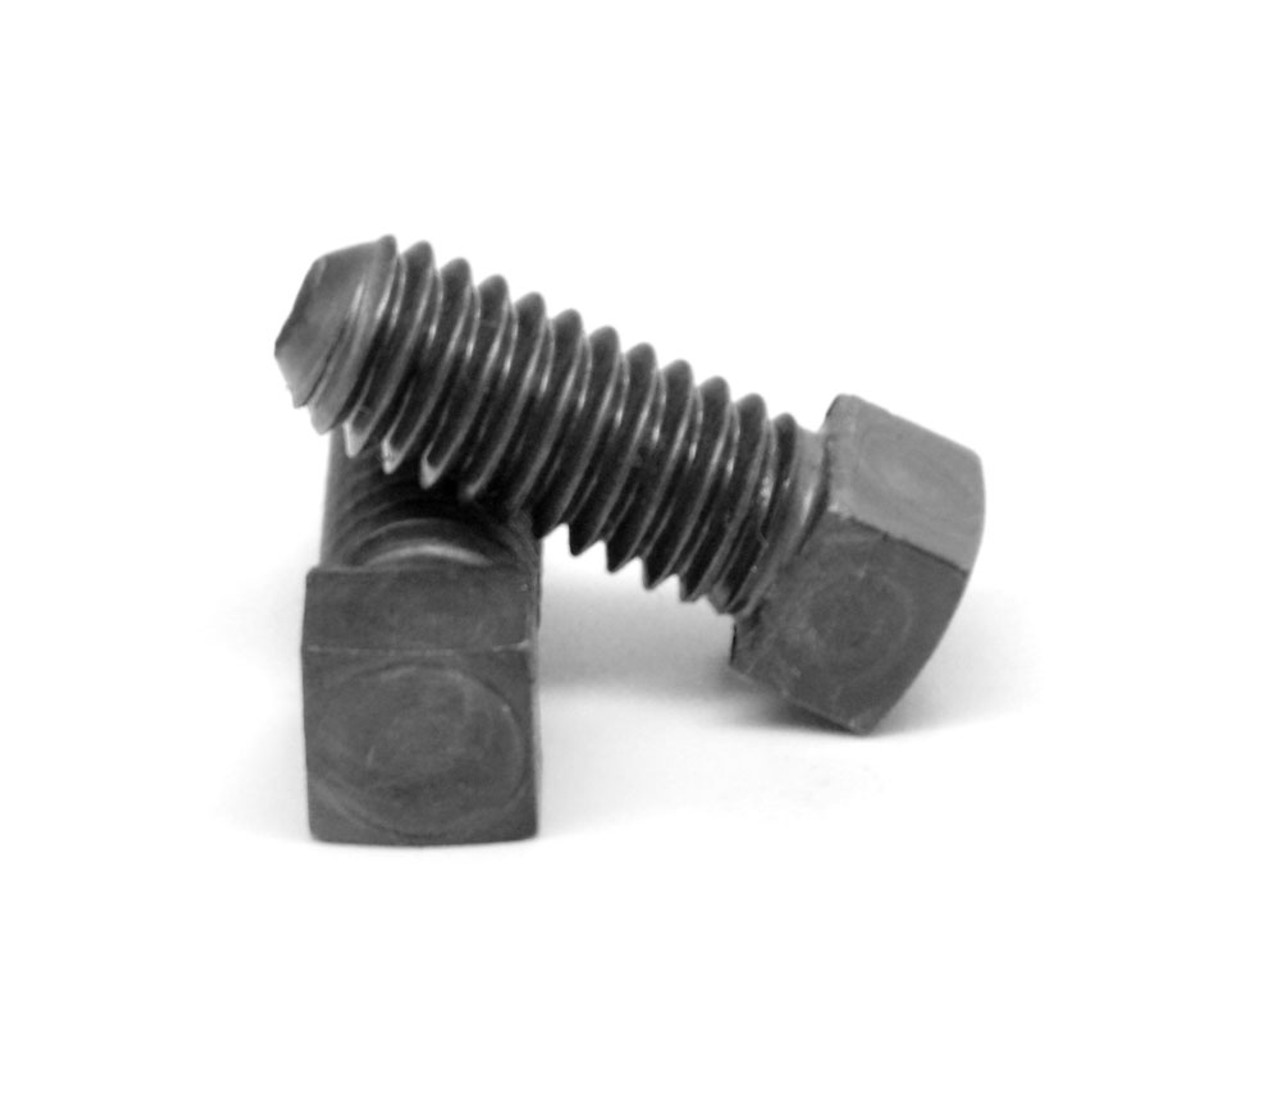 1/2-13 x 5 1/2 Coarse Thread Square Head Set Screw Cup Point Low Carbon Steel Plain Finish